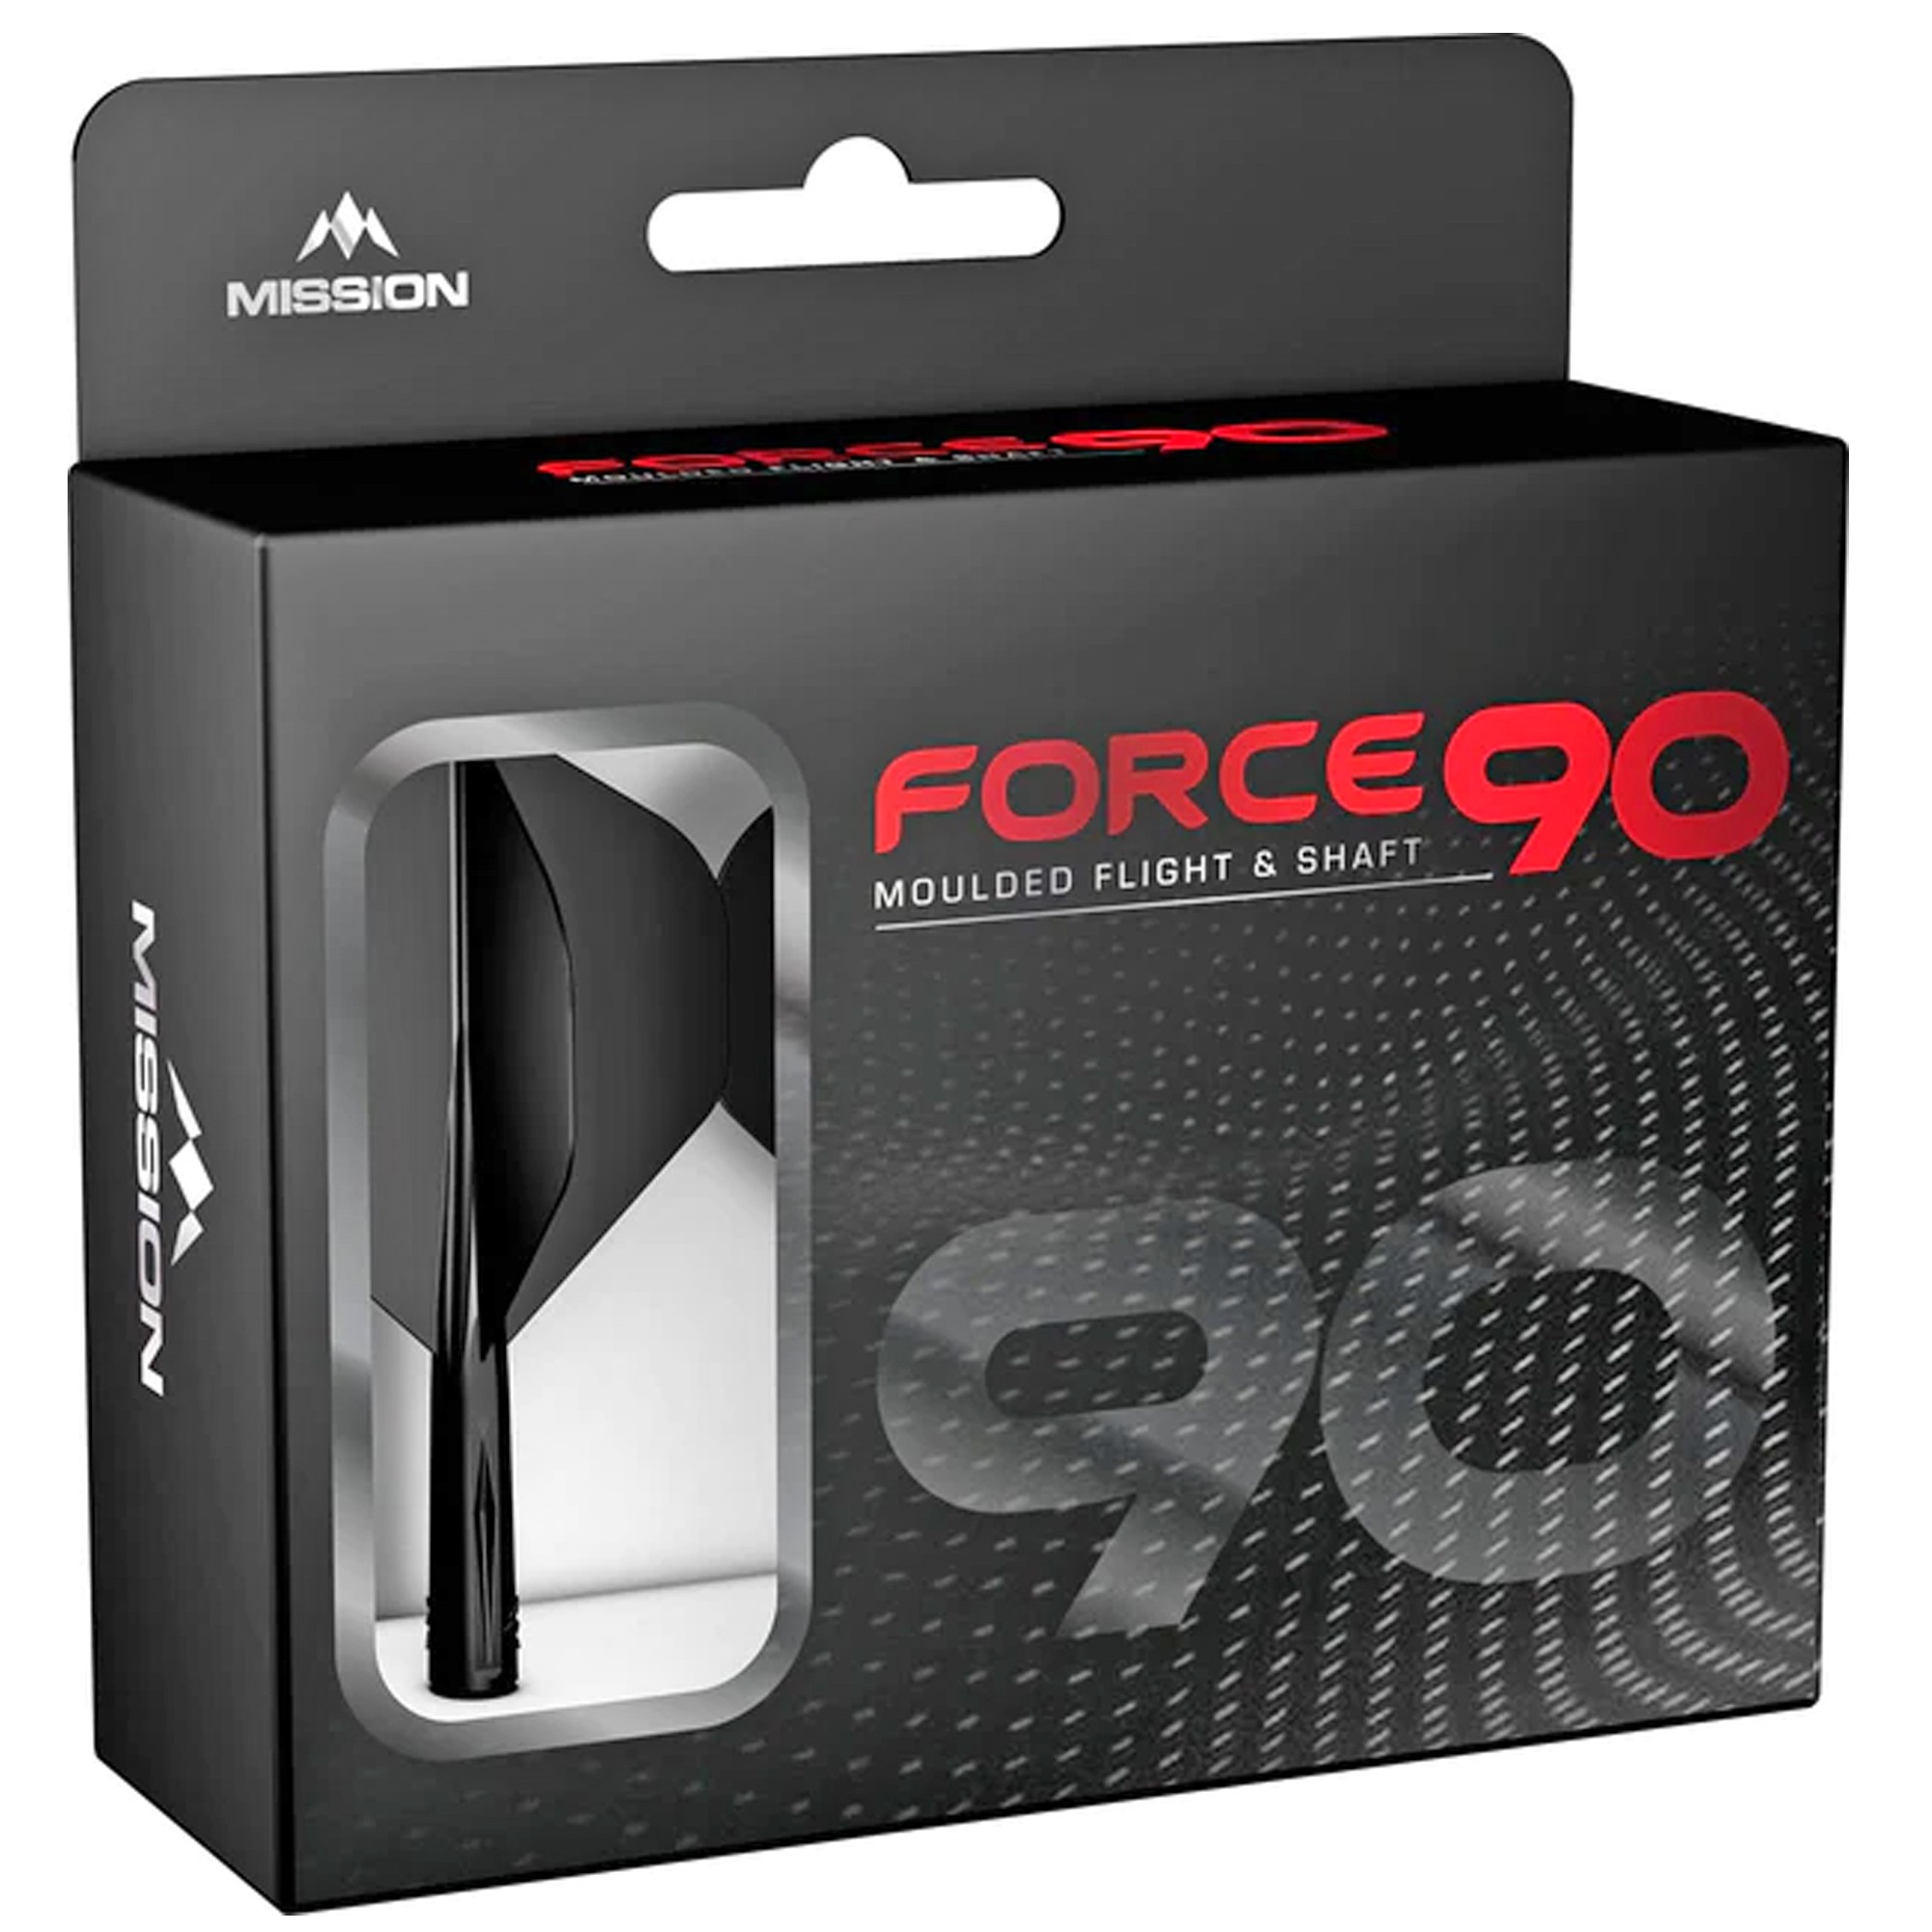 Force 90